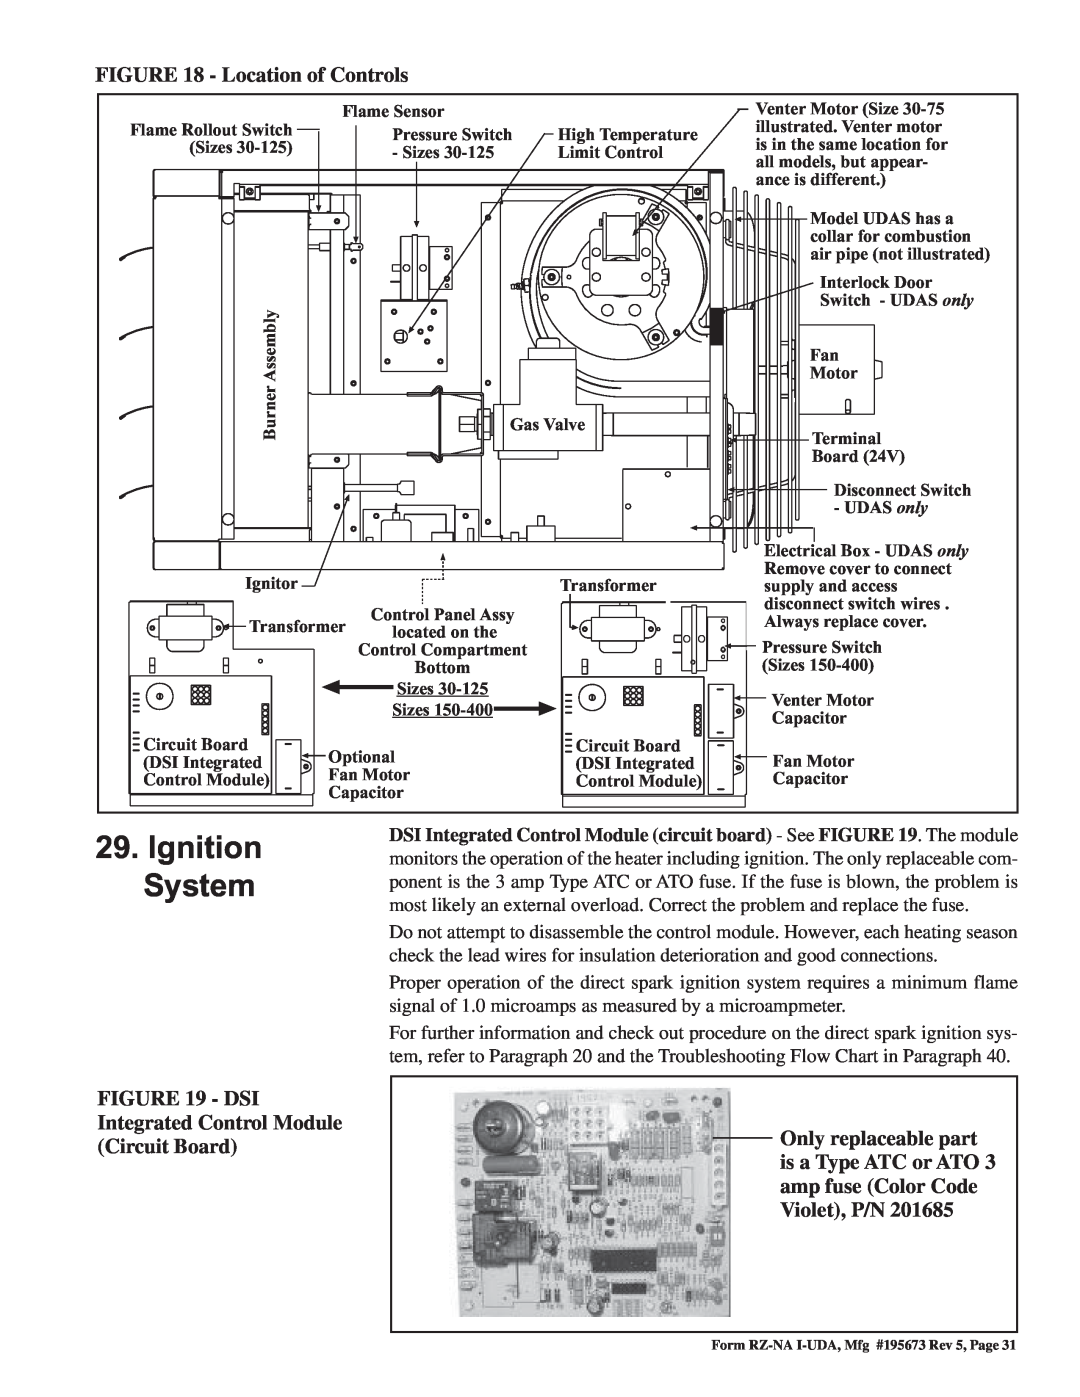 Thomas & Betts UDAP, UDAS dimensions Ignition System, Location of Controls, DSI Integrated Control Module, Circuit Board 